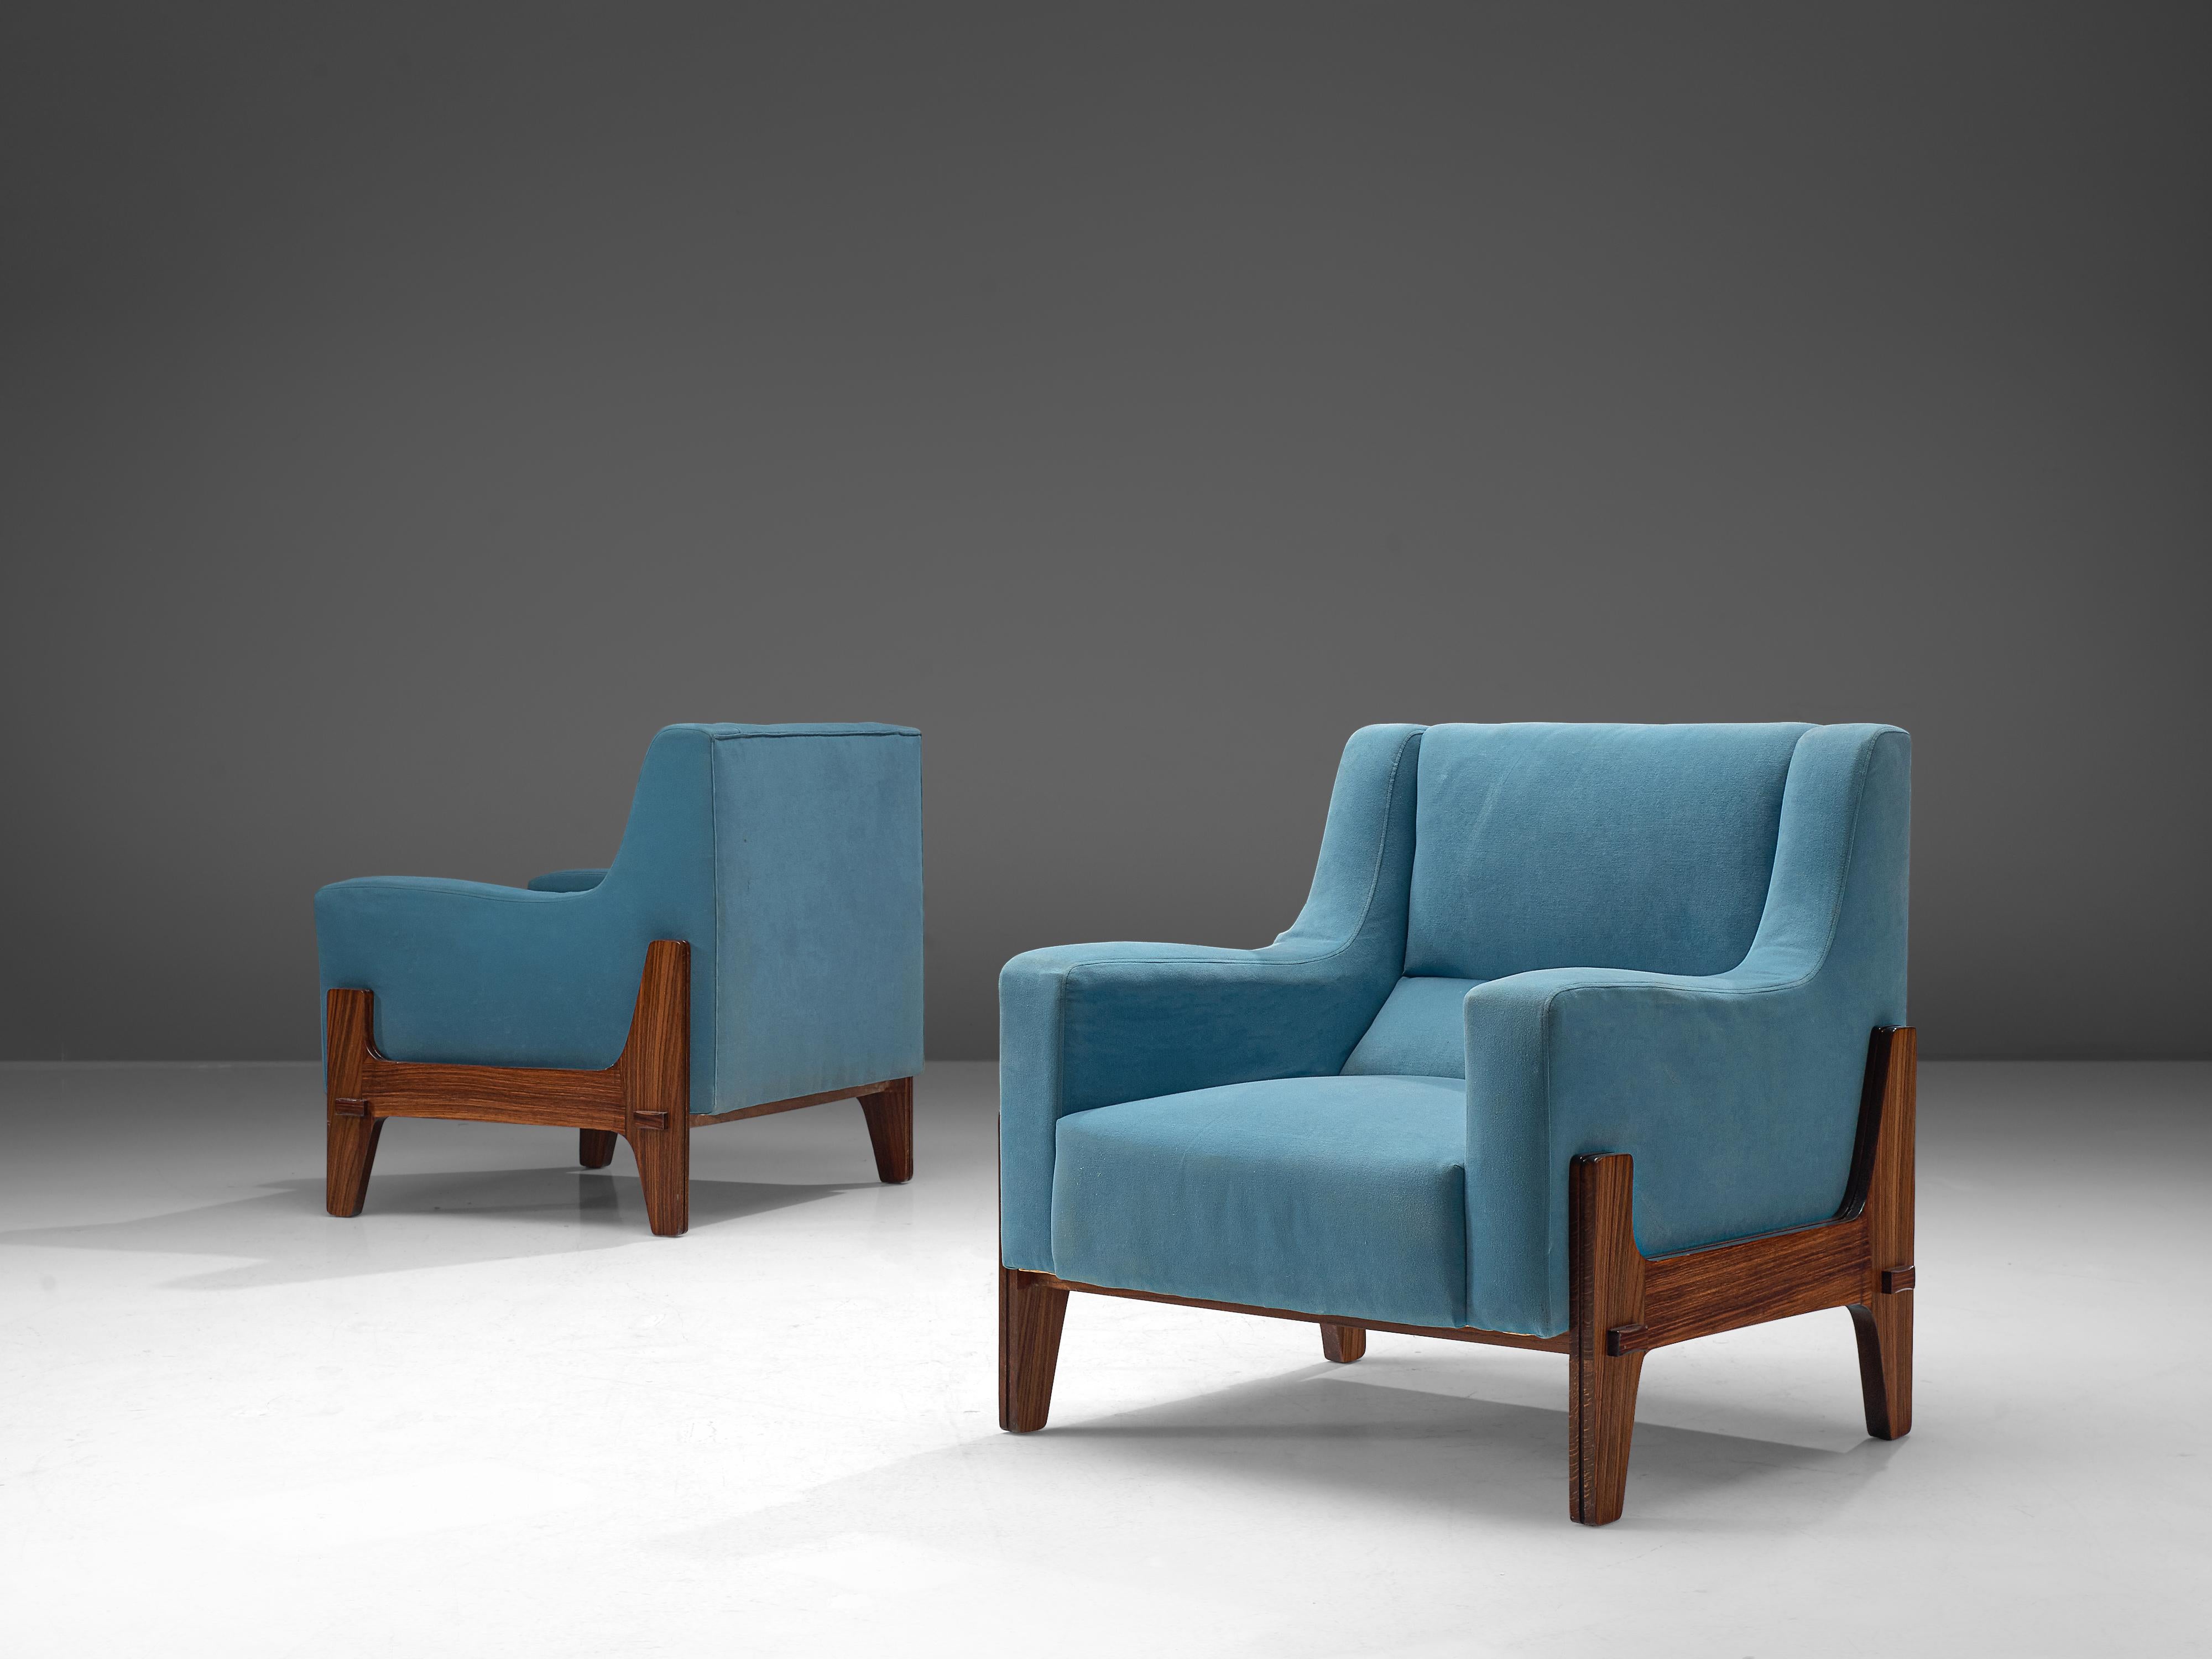 Eugenia & Luigi Reggio, set of two lounge chairs, rosewood, bright blue fabric, Italy, 1950s.

This Italian pair of lounge chairs from the 1950s features a sturdy frame made of rosewood that is beautifully exposed on the outside of the seat and